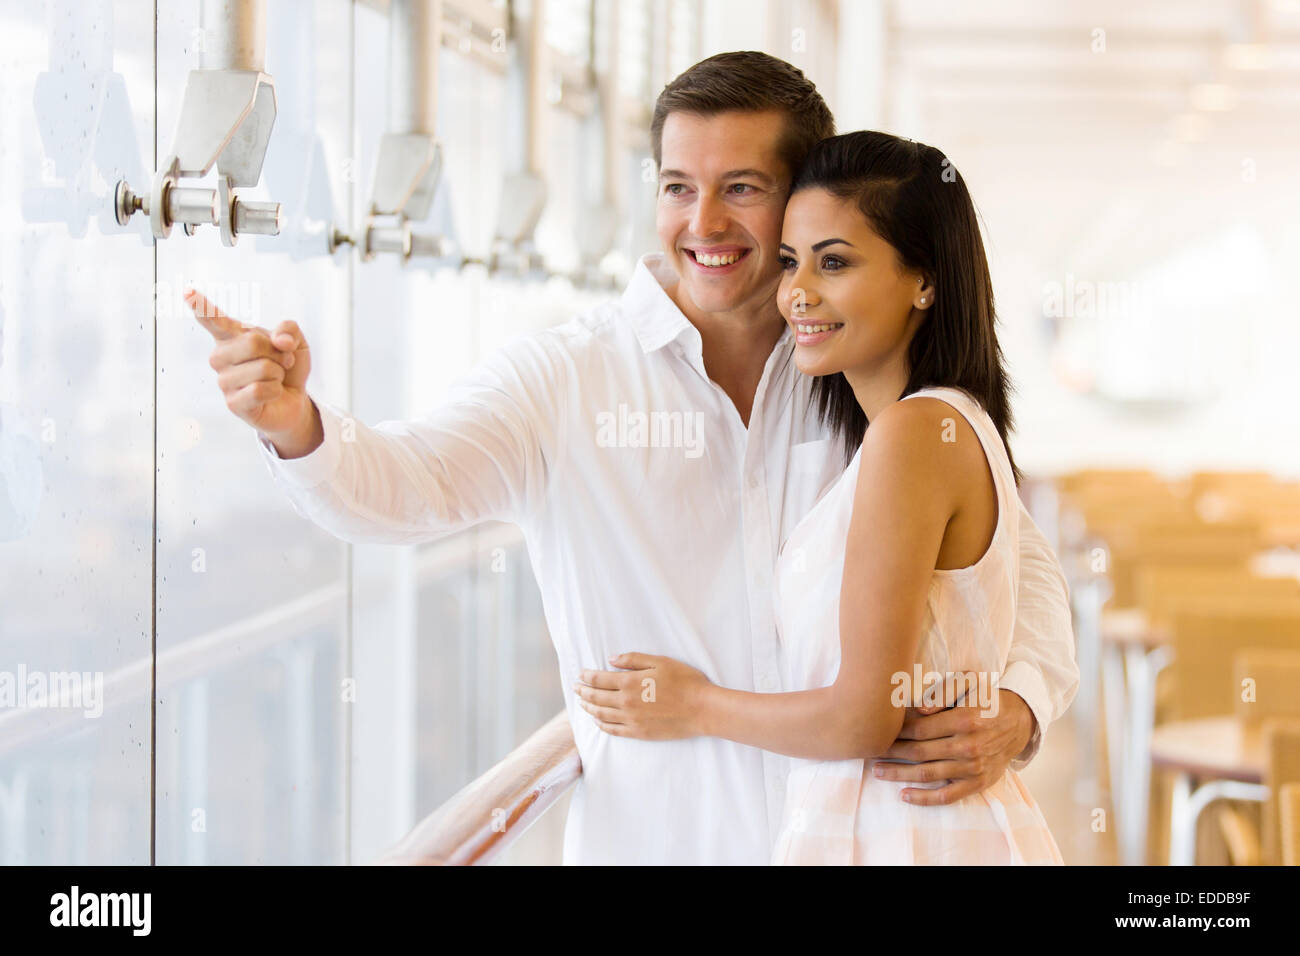 cute couple standing at restaurant and pointing outside Stock Photo